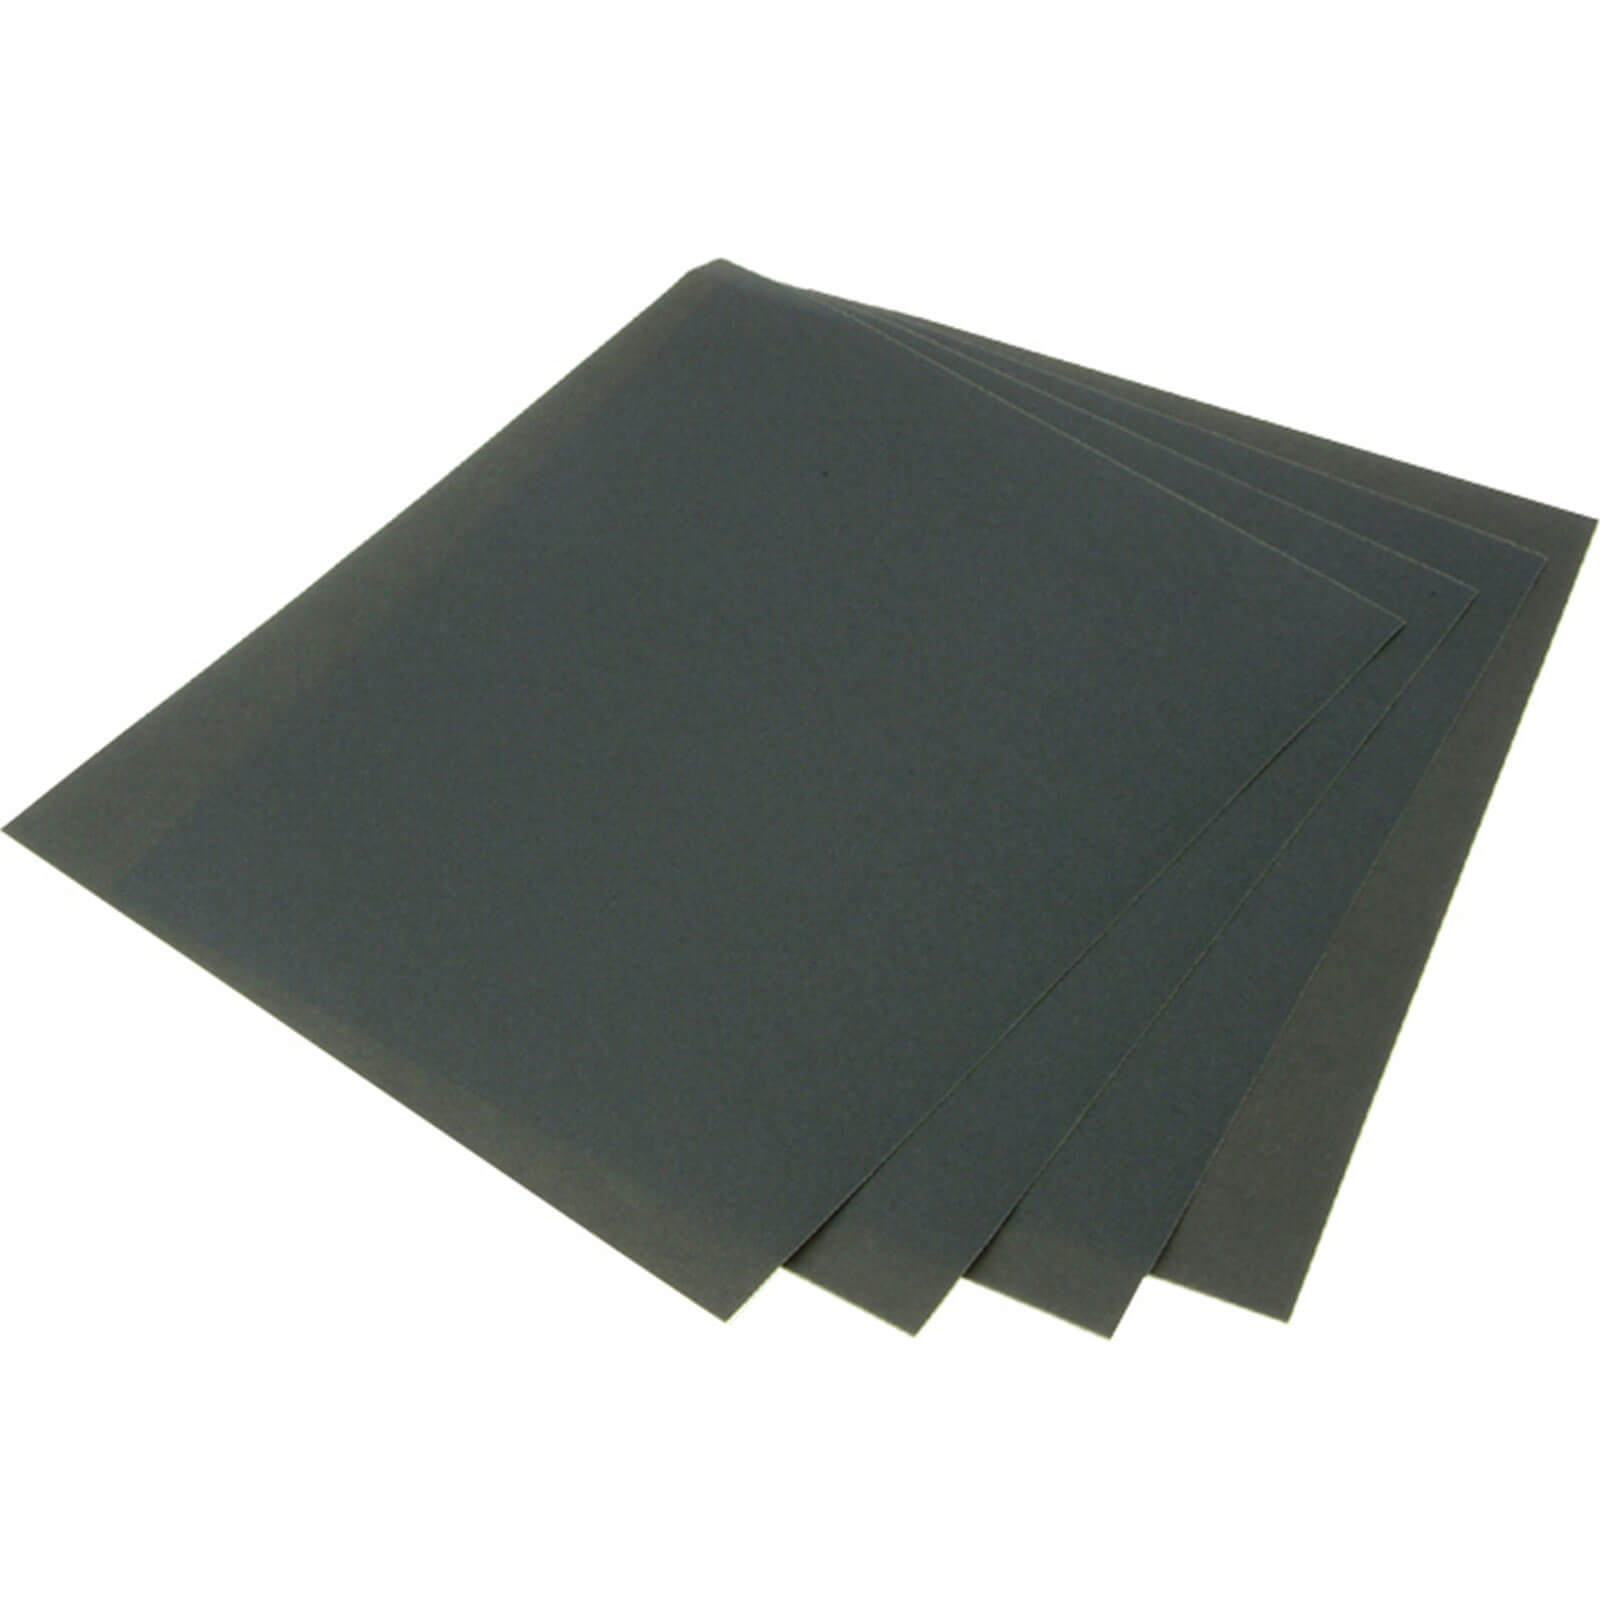 Image of Faithfull Wet and Dry Paper Sheets 230 x 280mm 80g Pack of 25